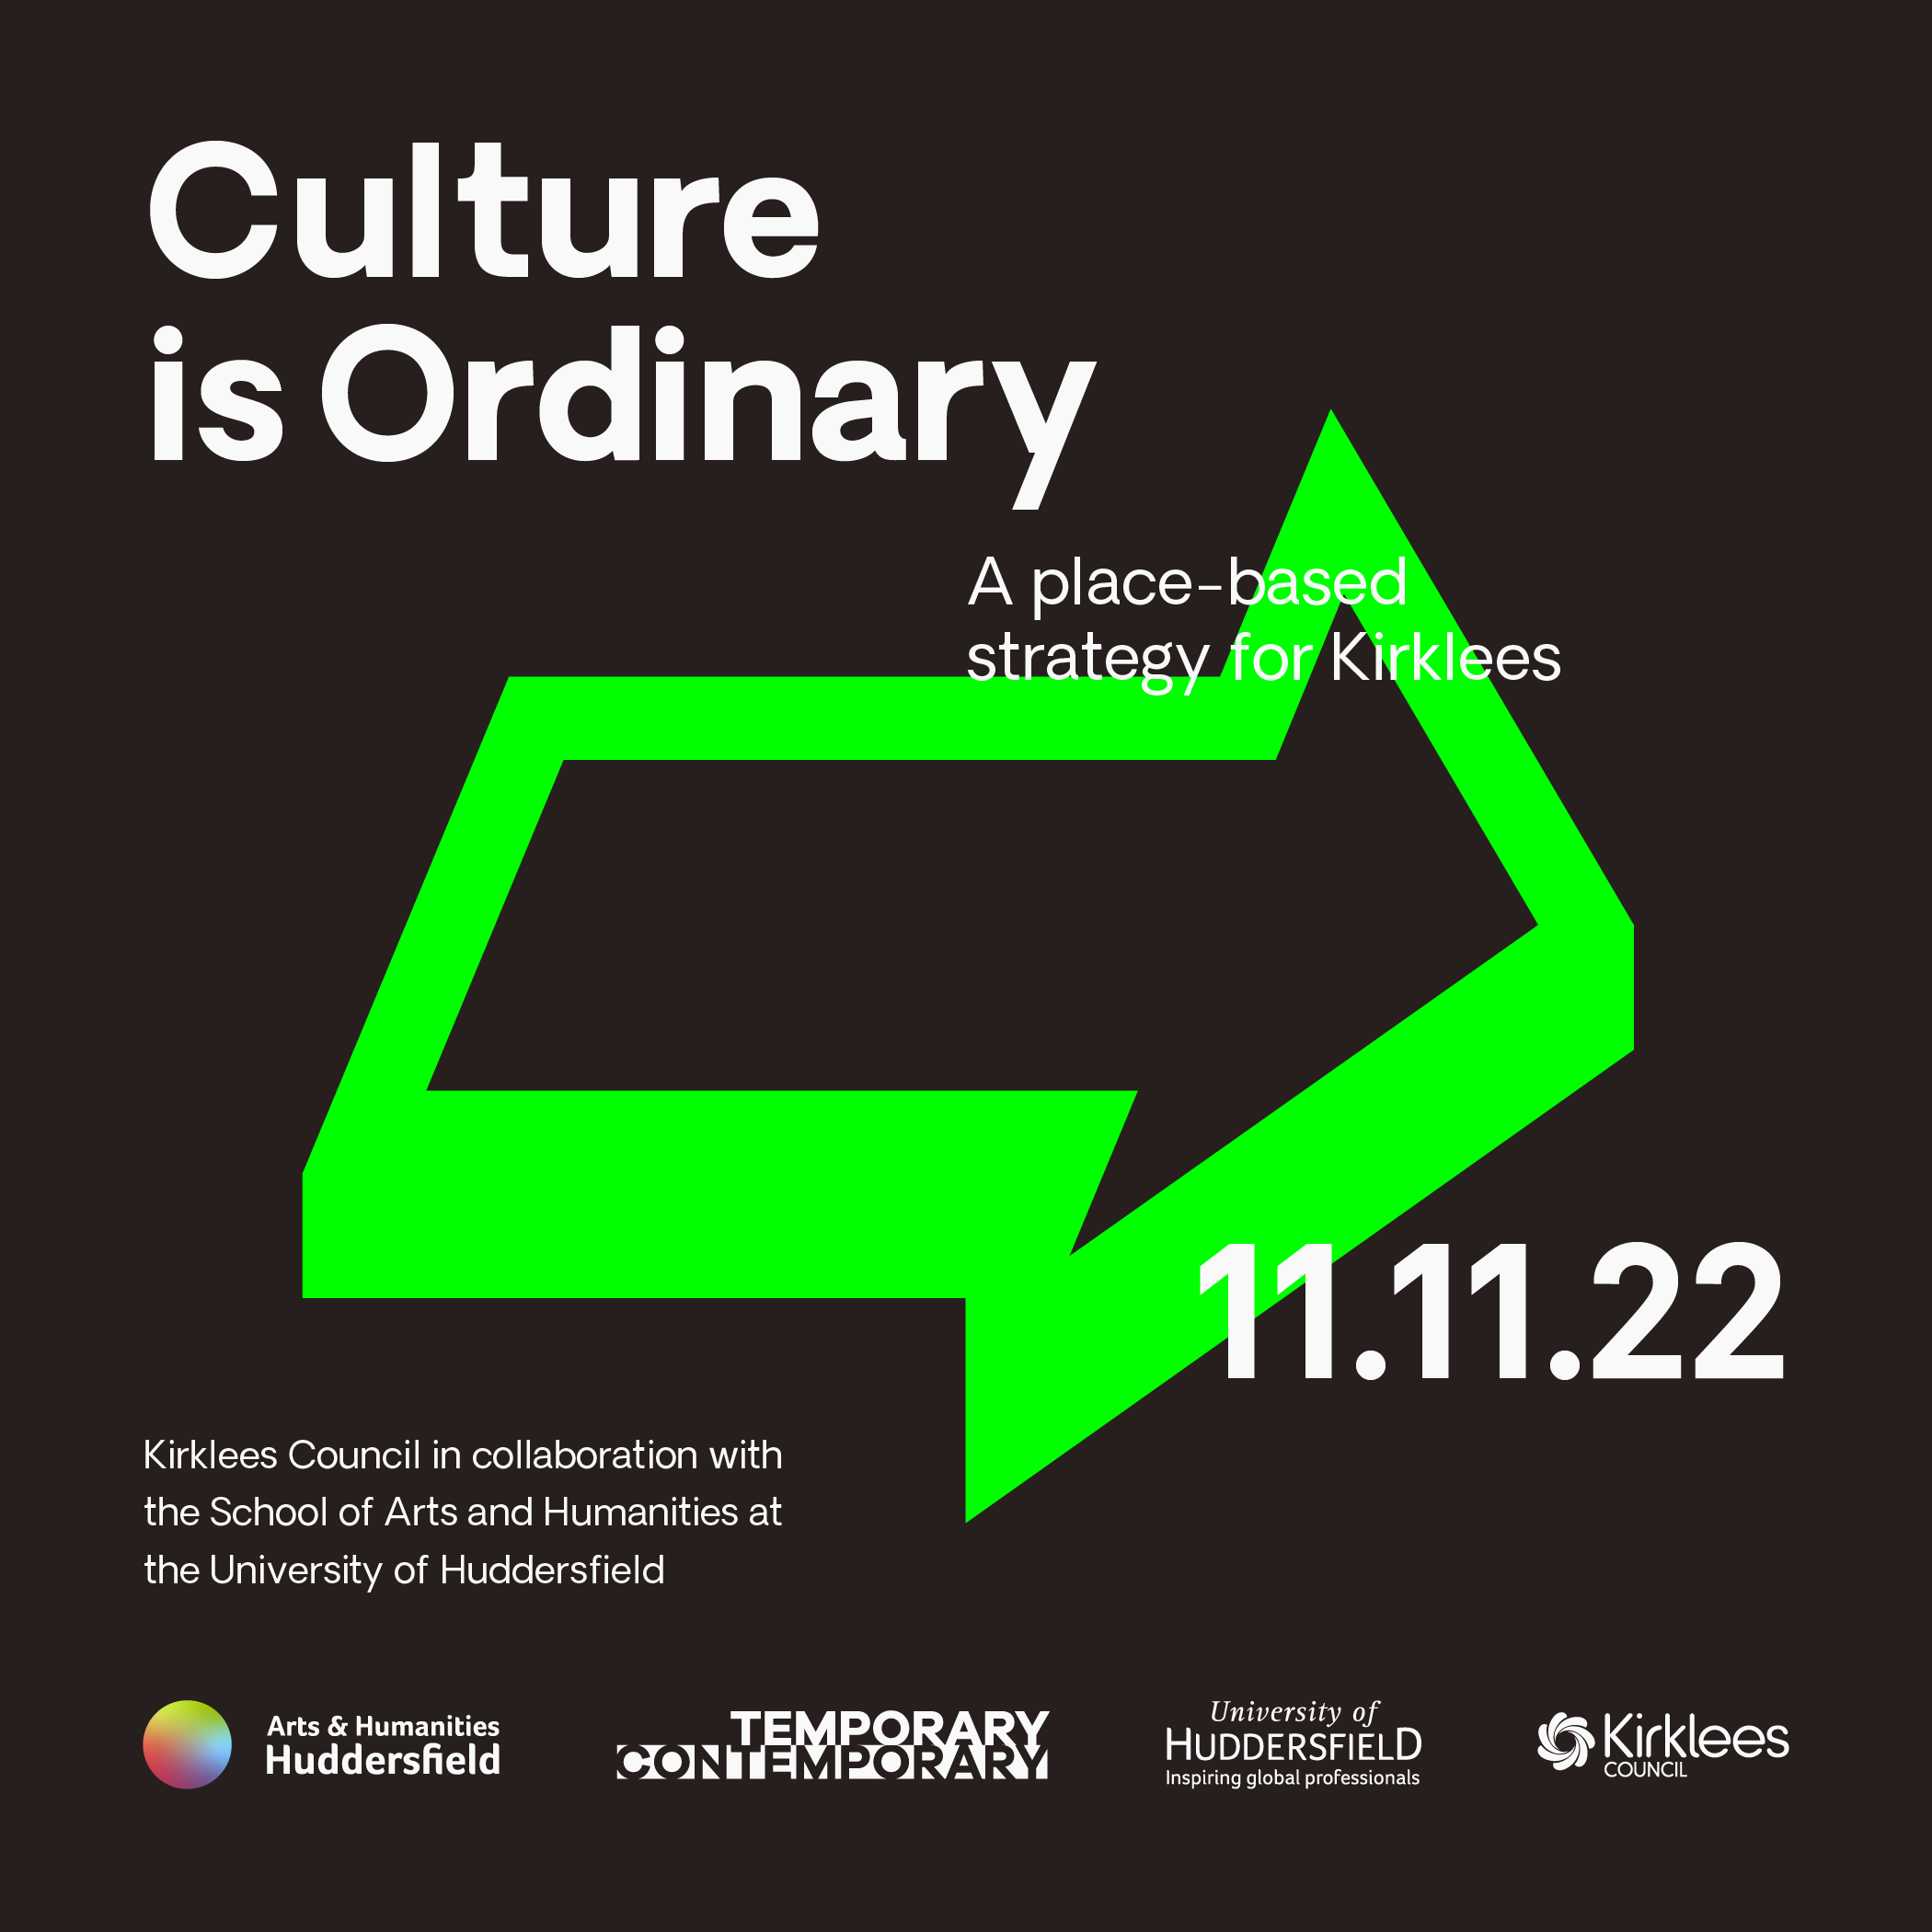 Promotional image for culture is ordinary event